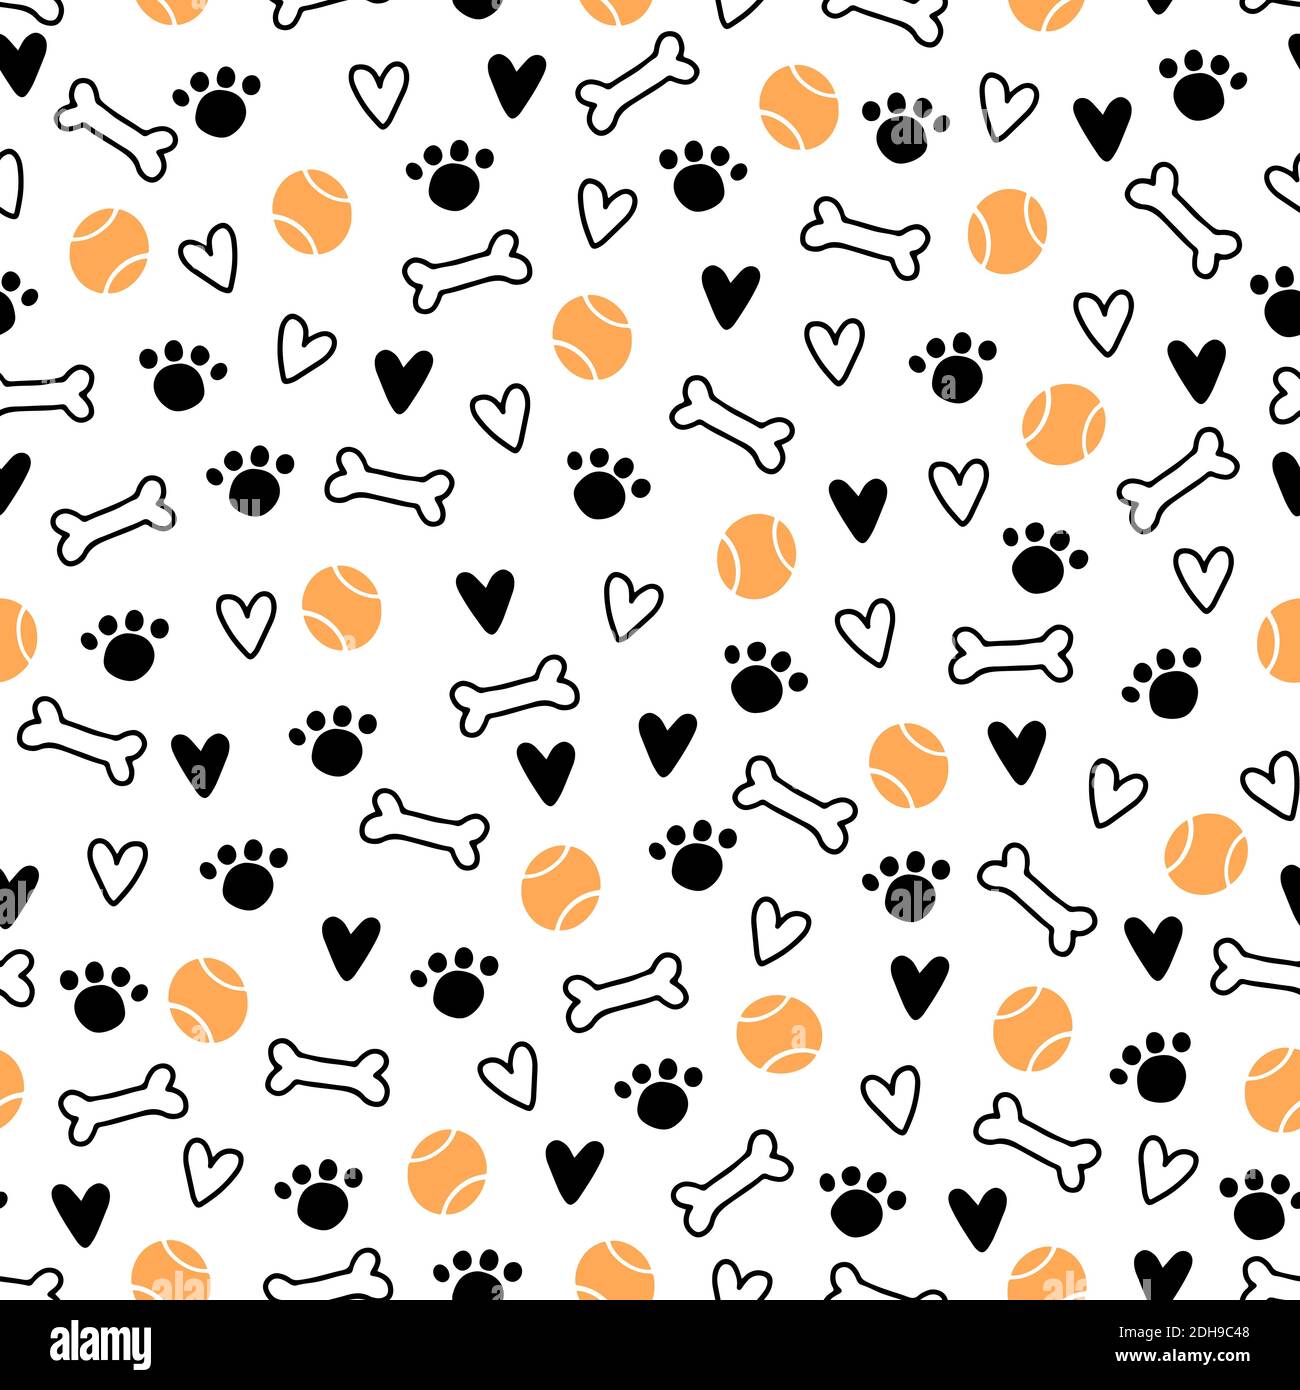  (Lovely Corgi and Paw Footprint Pattern) Patterned